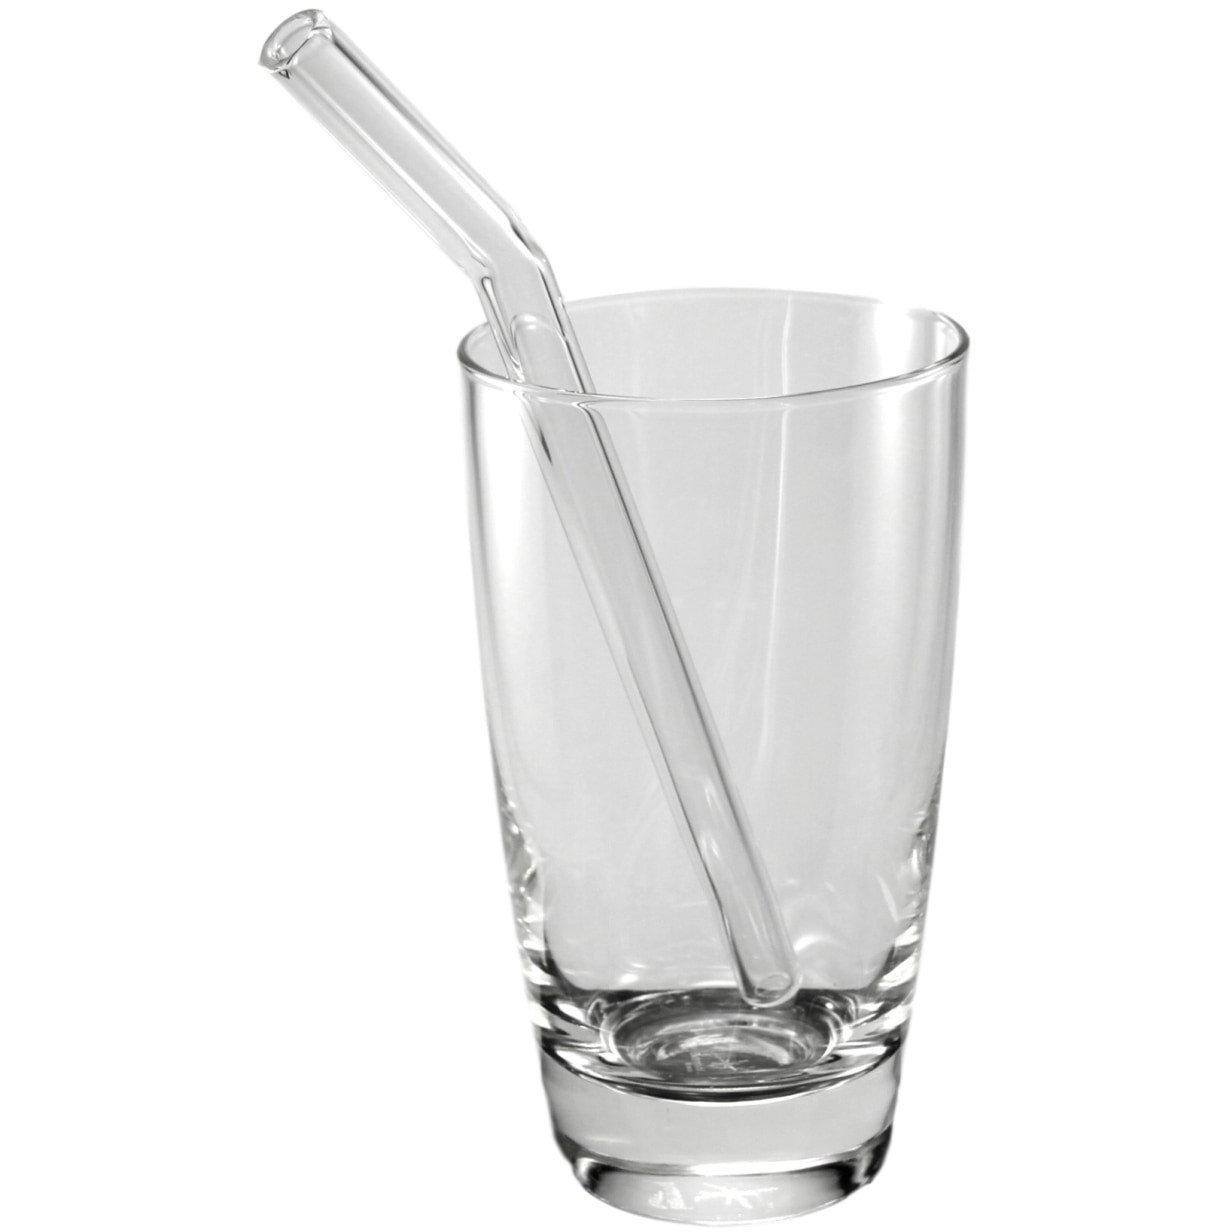 19 Ideal Short Wide Cylinder Vase 2024 free download short wide cylinder vase of choosing your glass straw size glass sipper intended for marie in oakville canada purchased a smoothie 12mm glass drinking straws